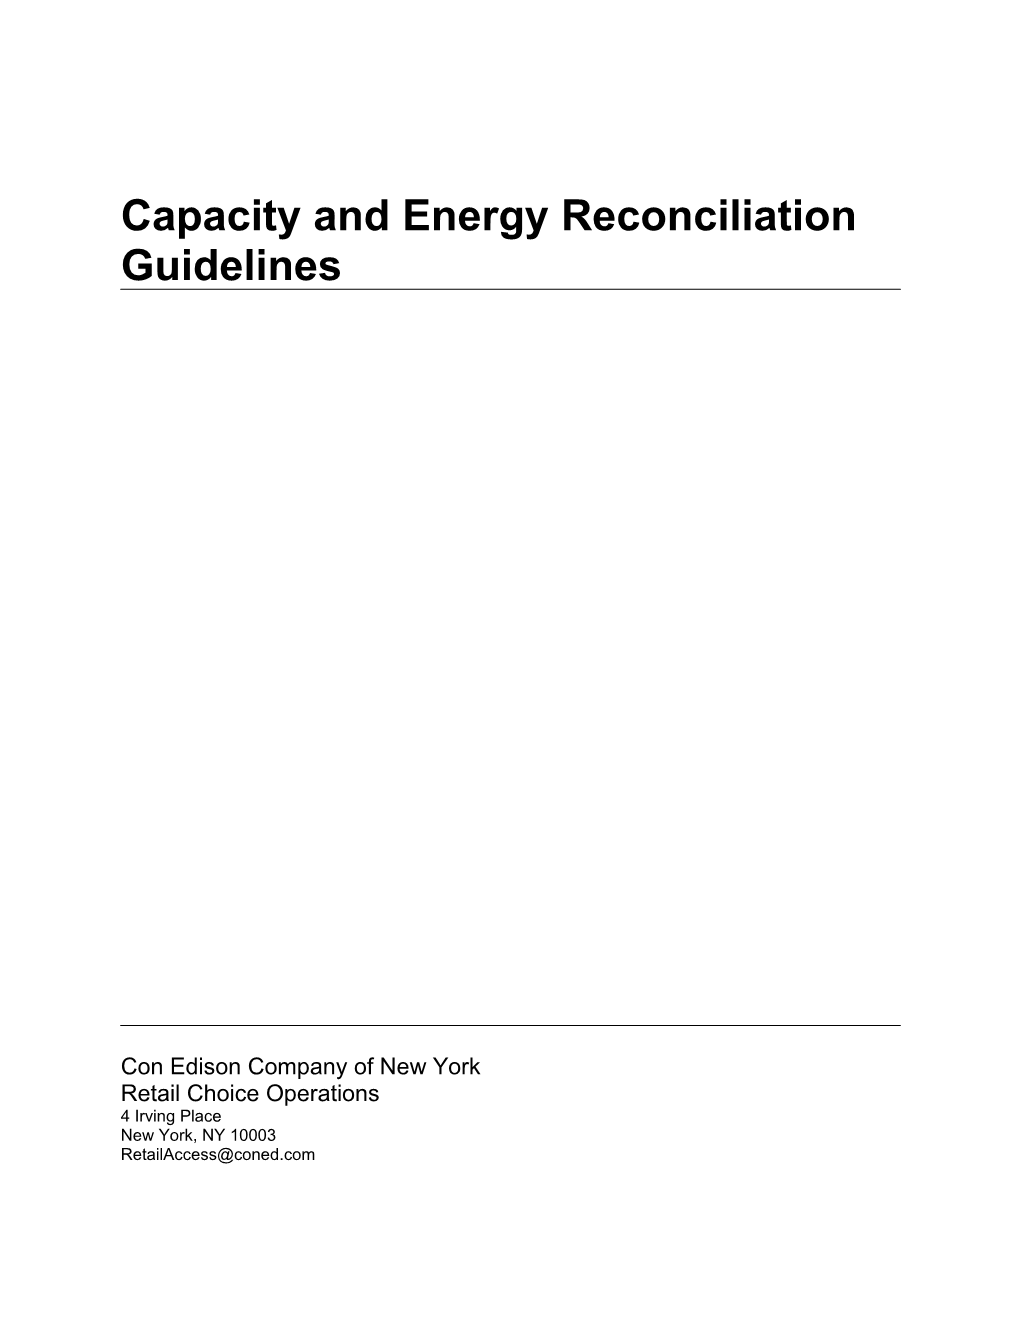 Capacity and Energy Reconciliation Guidelines